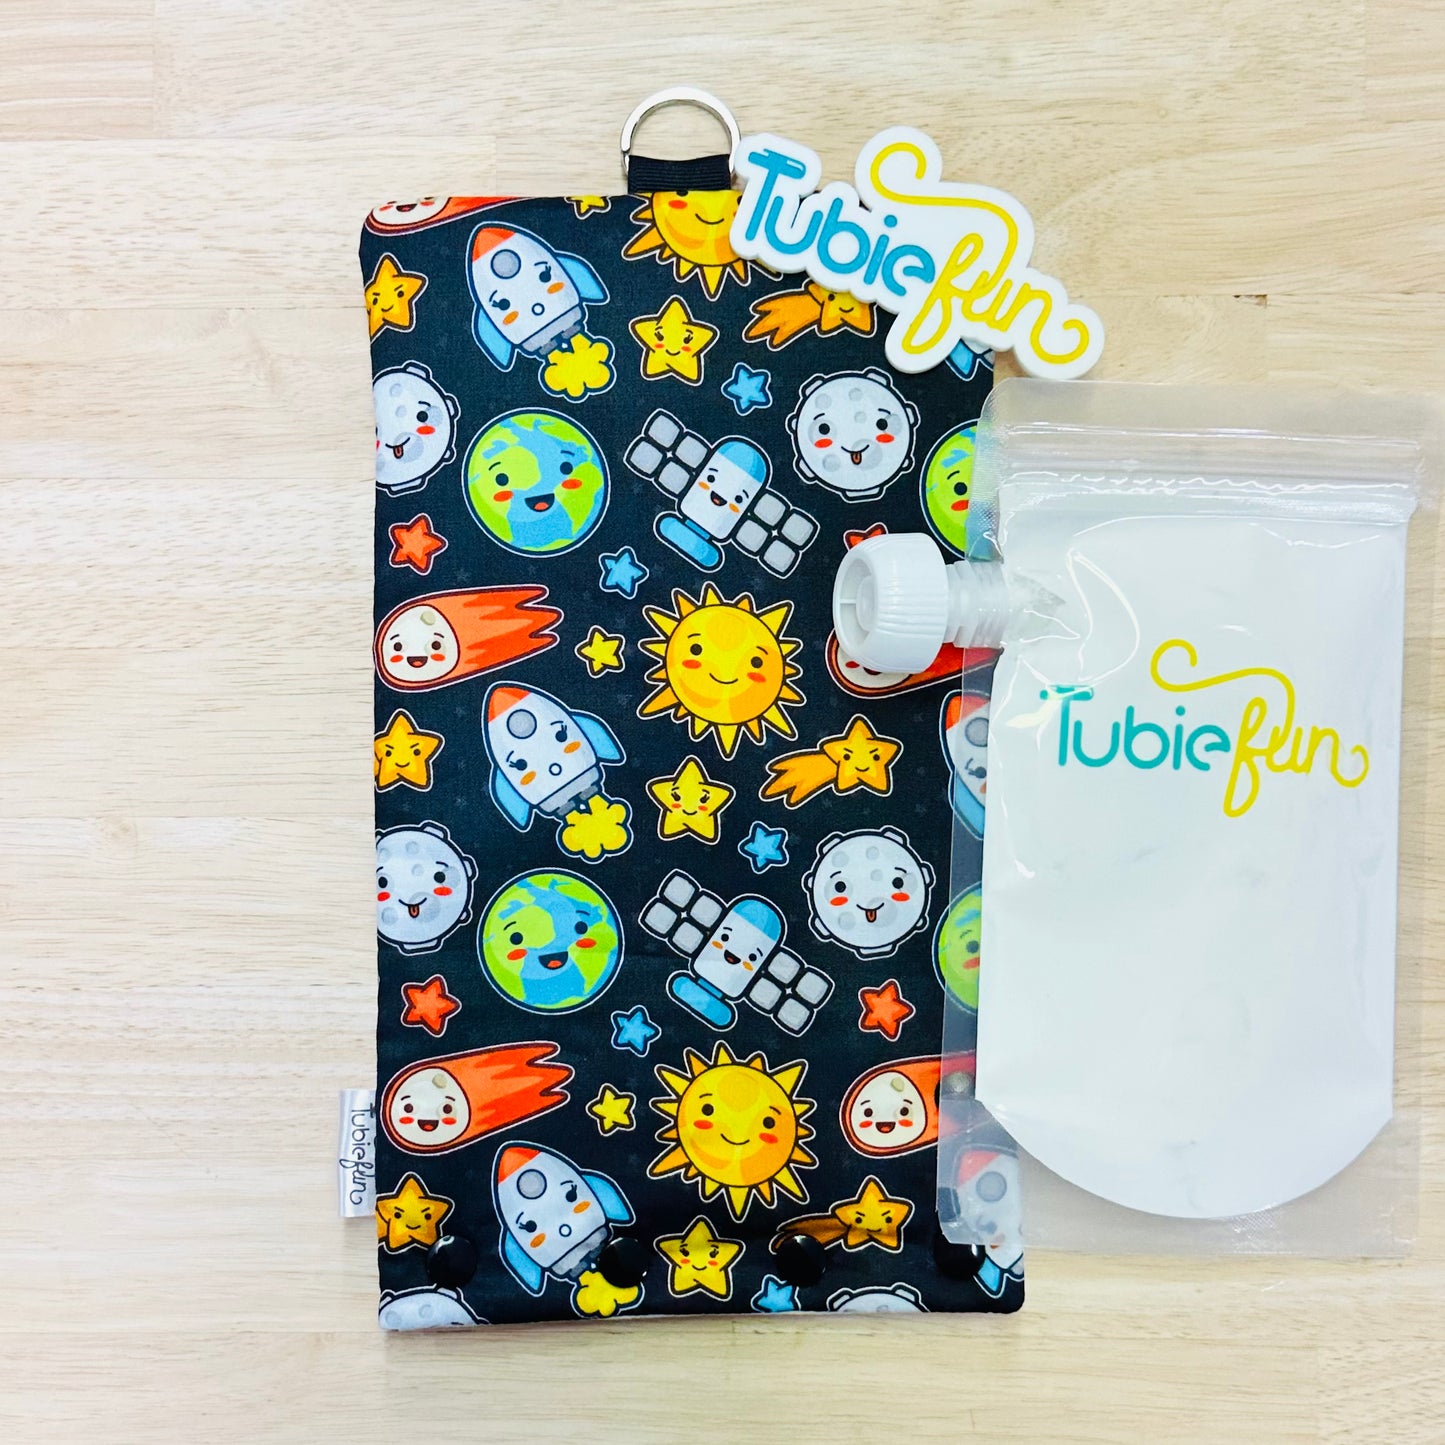 NEW Insulated Milk Bag Suitable for Tubie Fun 500ml Reusable Pouches - Space Characters